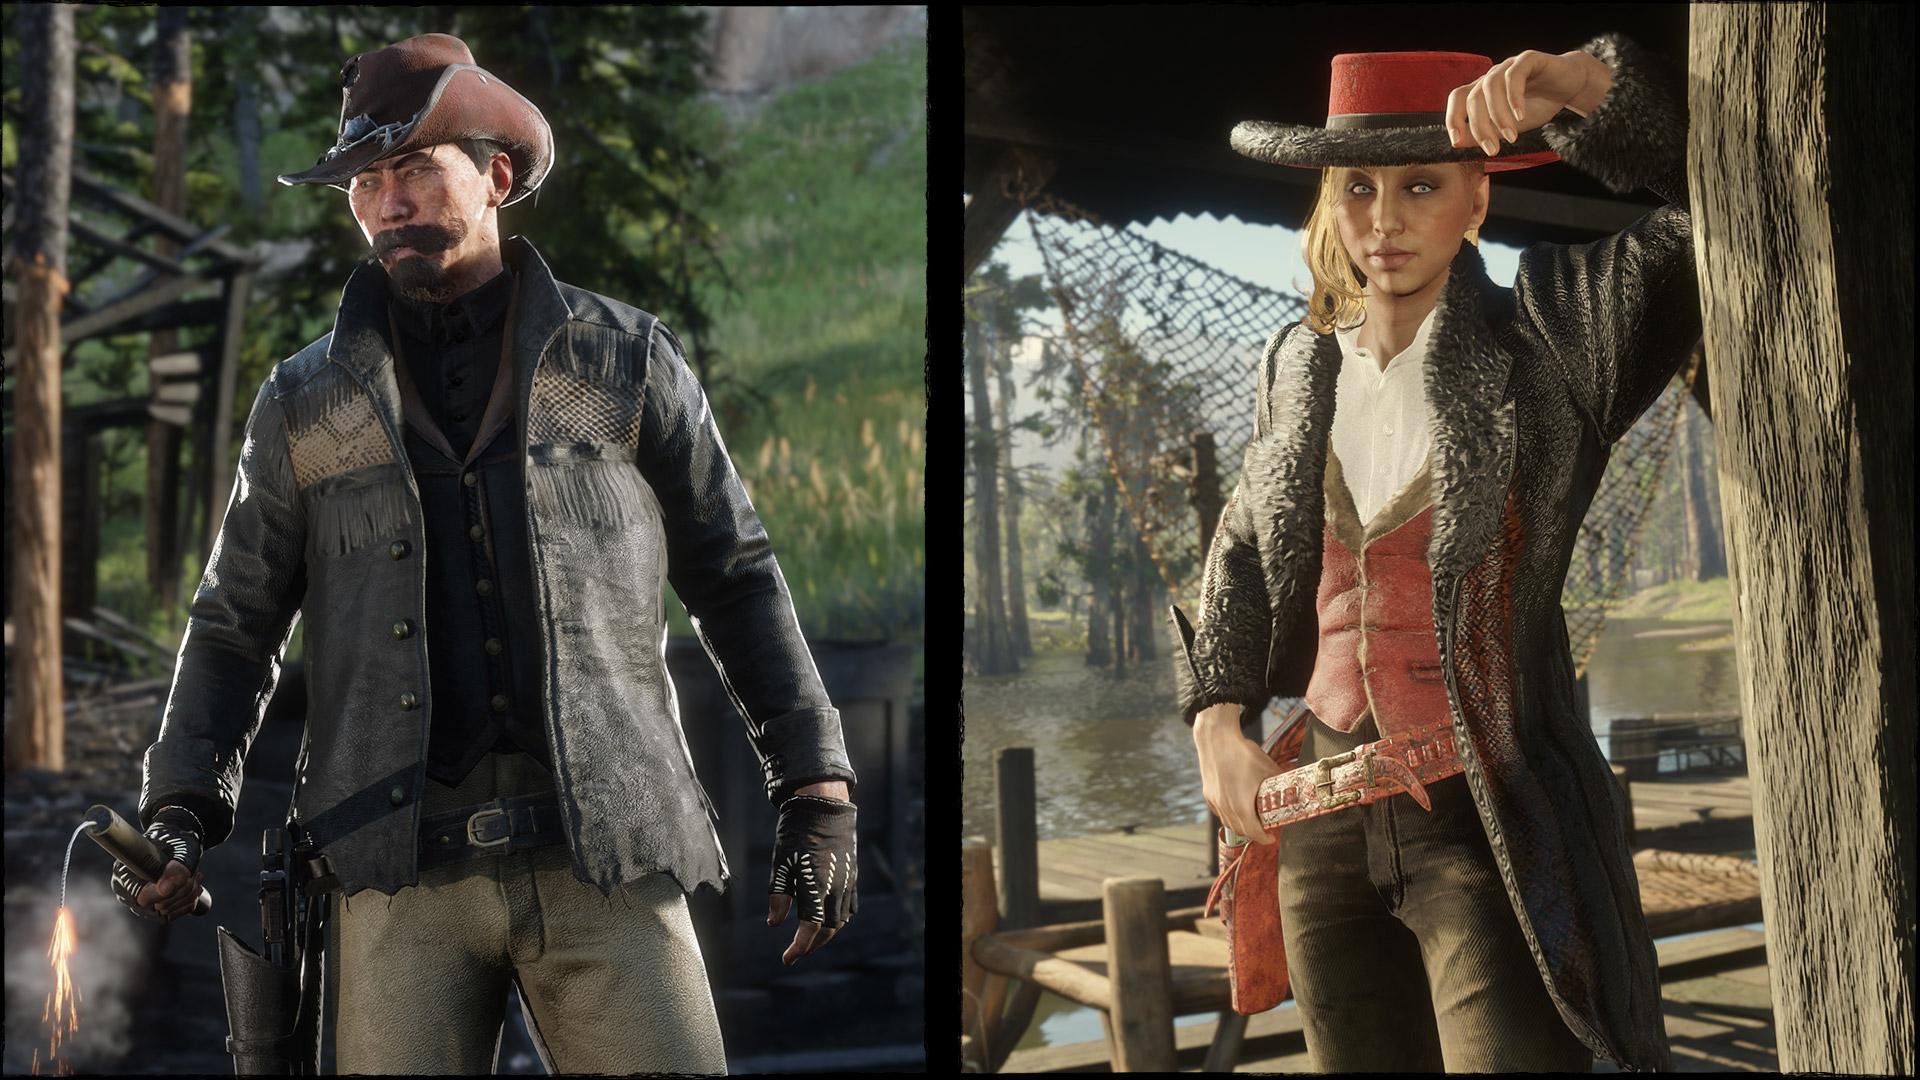 where do you buy clothes in red dead redemption 2